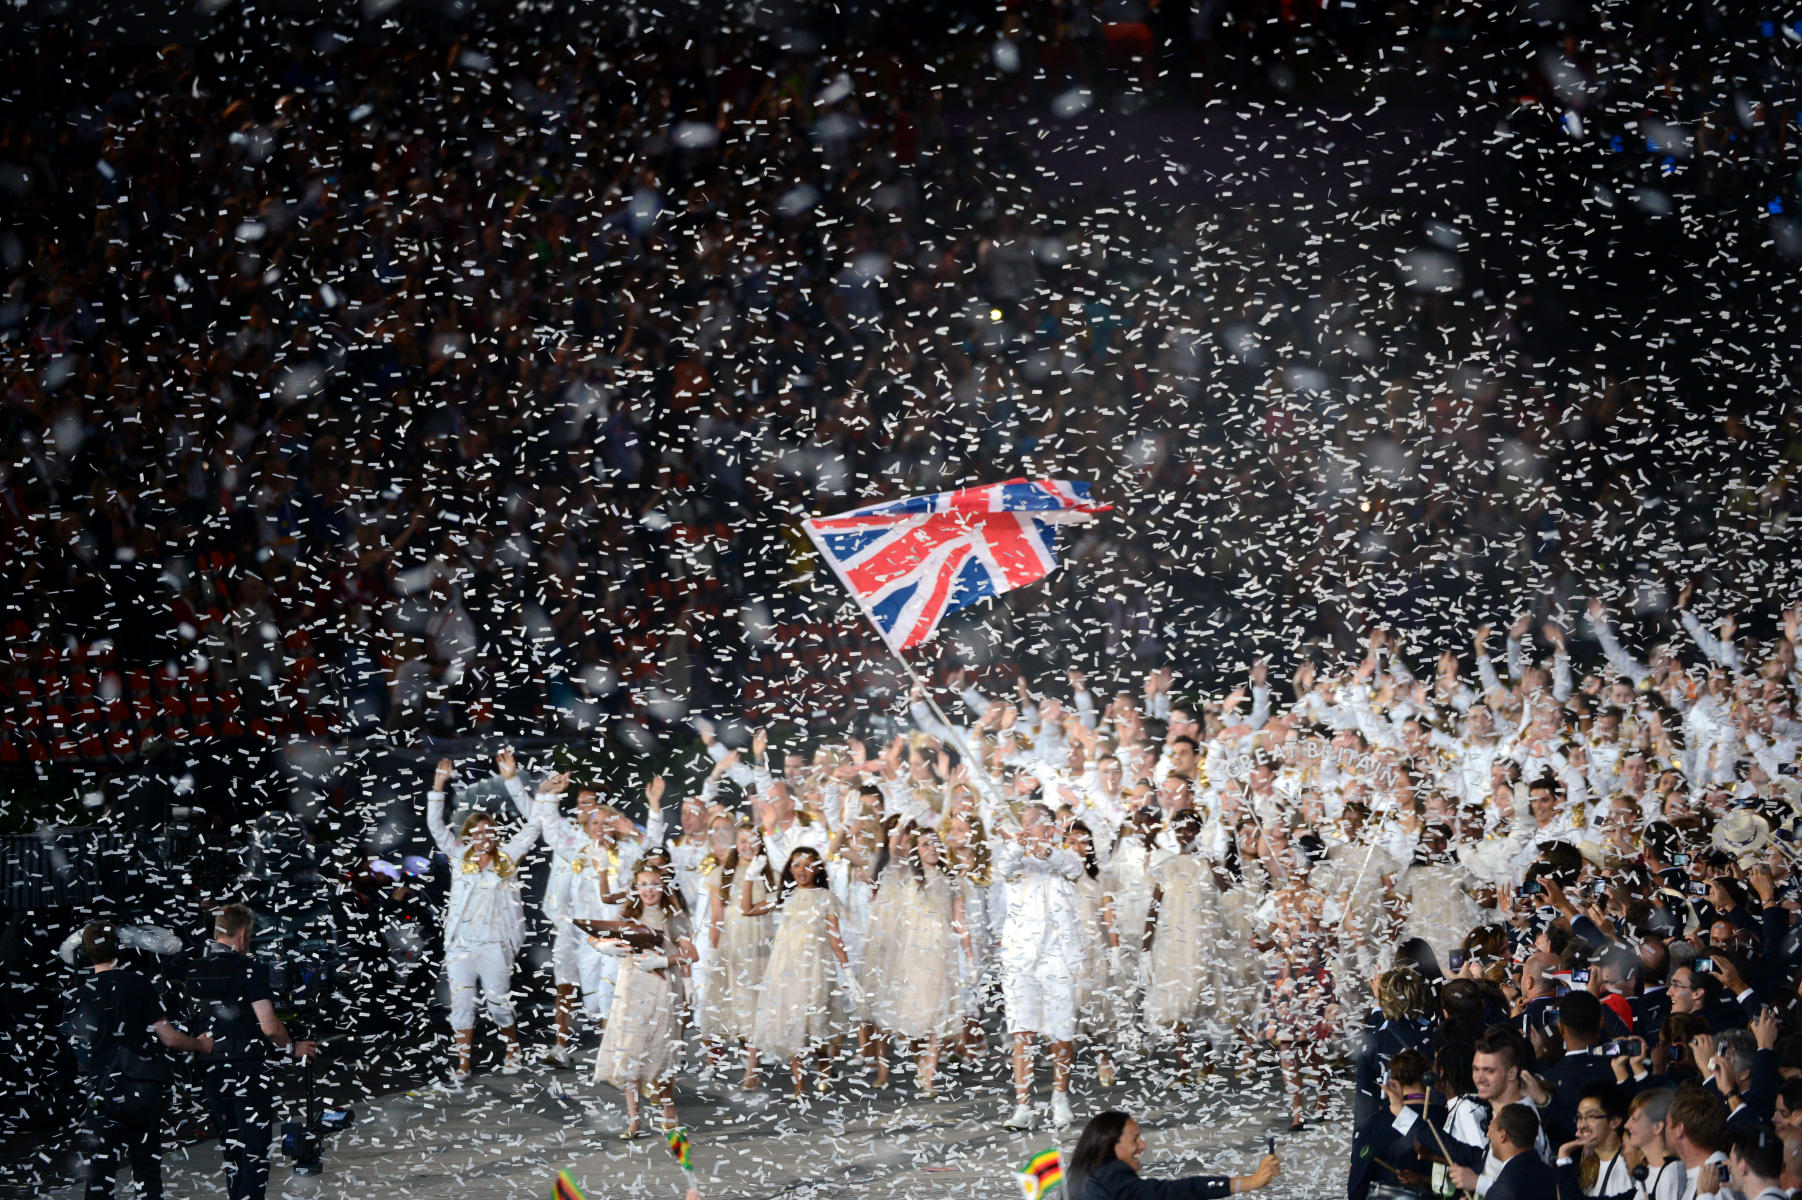 Great Britain team entering the Olympic Stadium during the Opening Ceremonies of the London Olympics. : London Olympics : Photography by Adam Stoltman: Sports Photography, The Arts, Portraiture, Travel, Photojournalism and Fine Art in New York